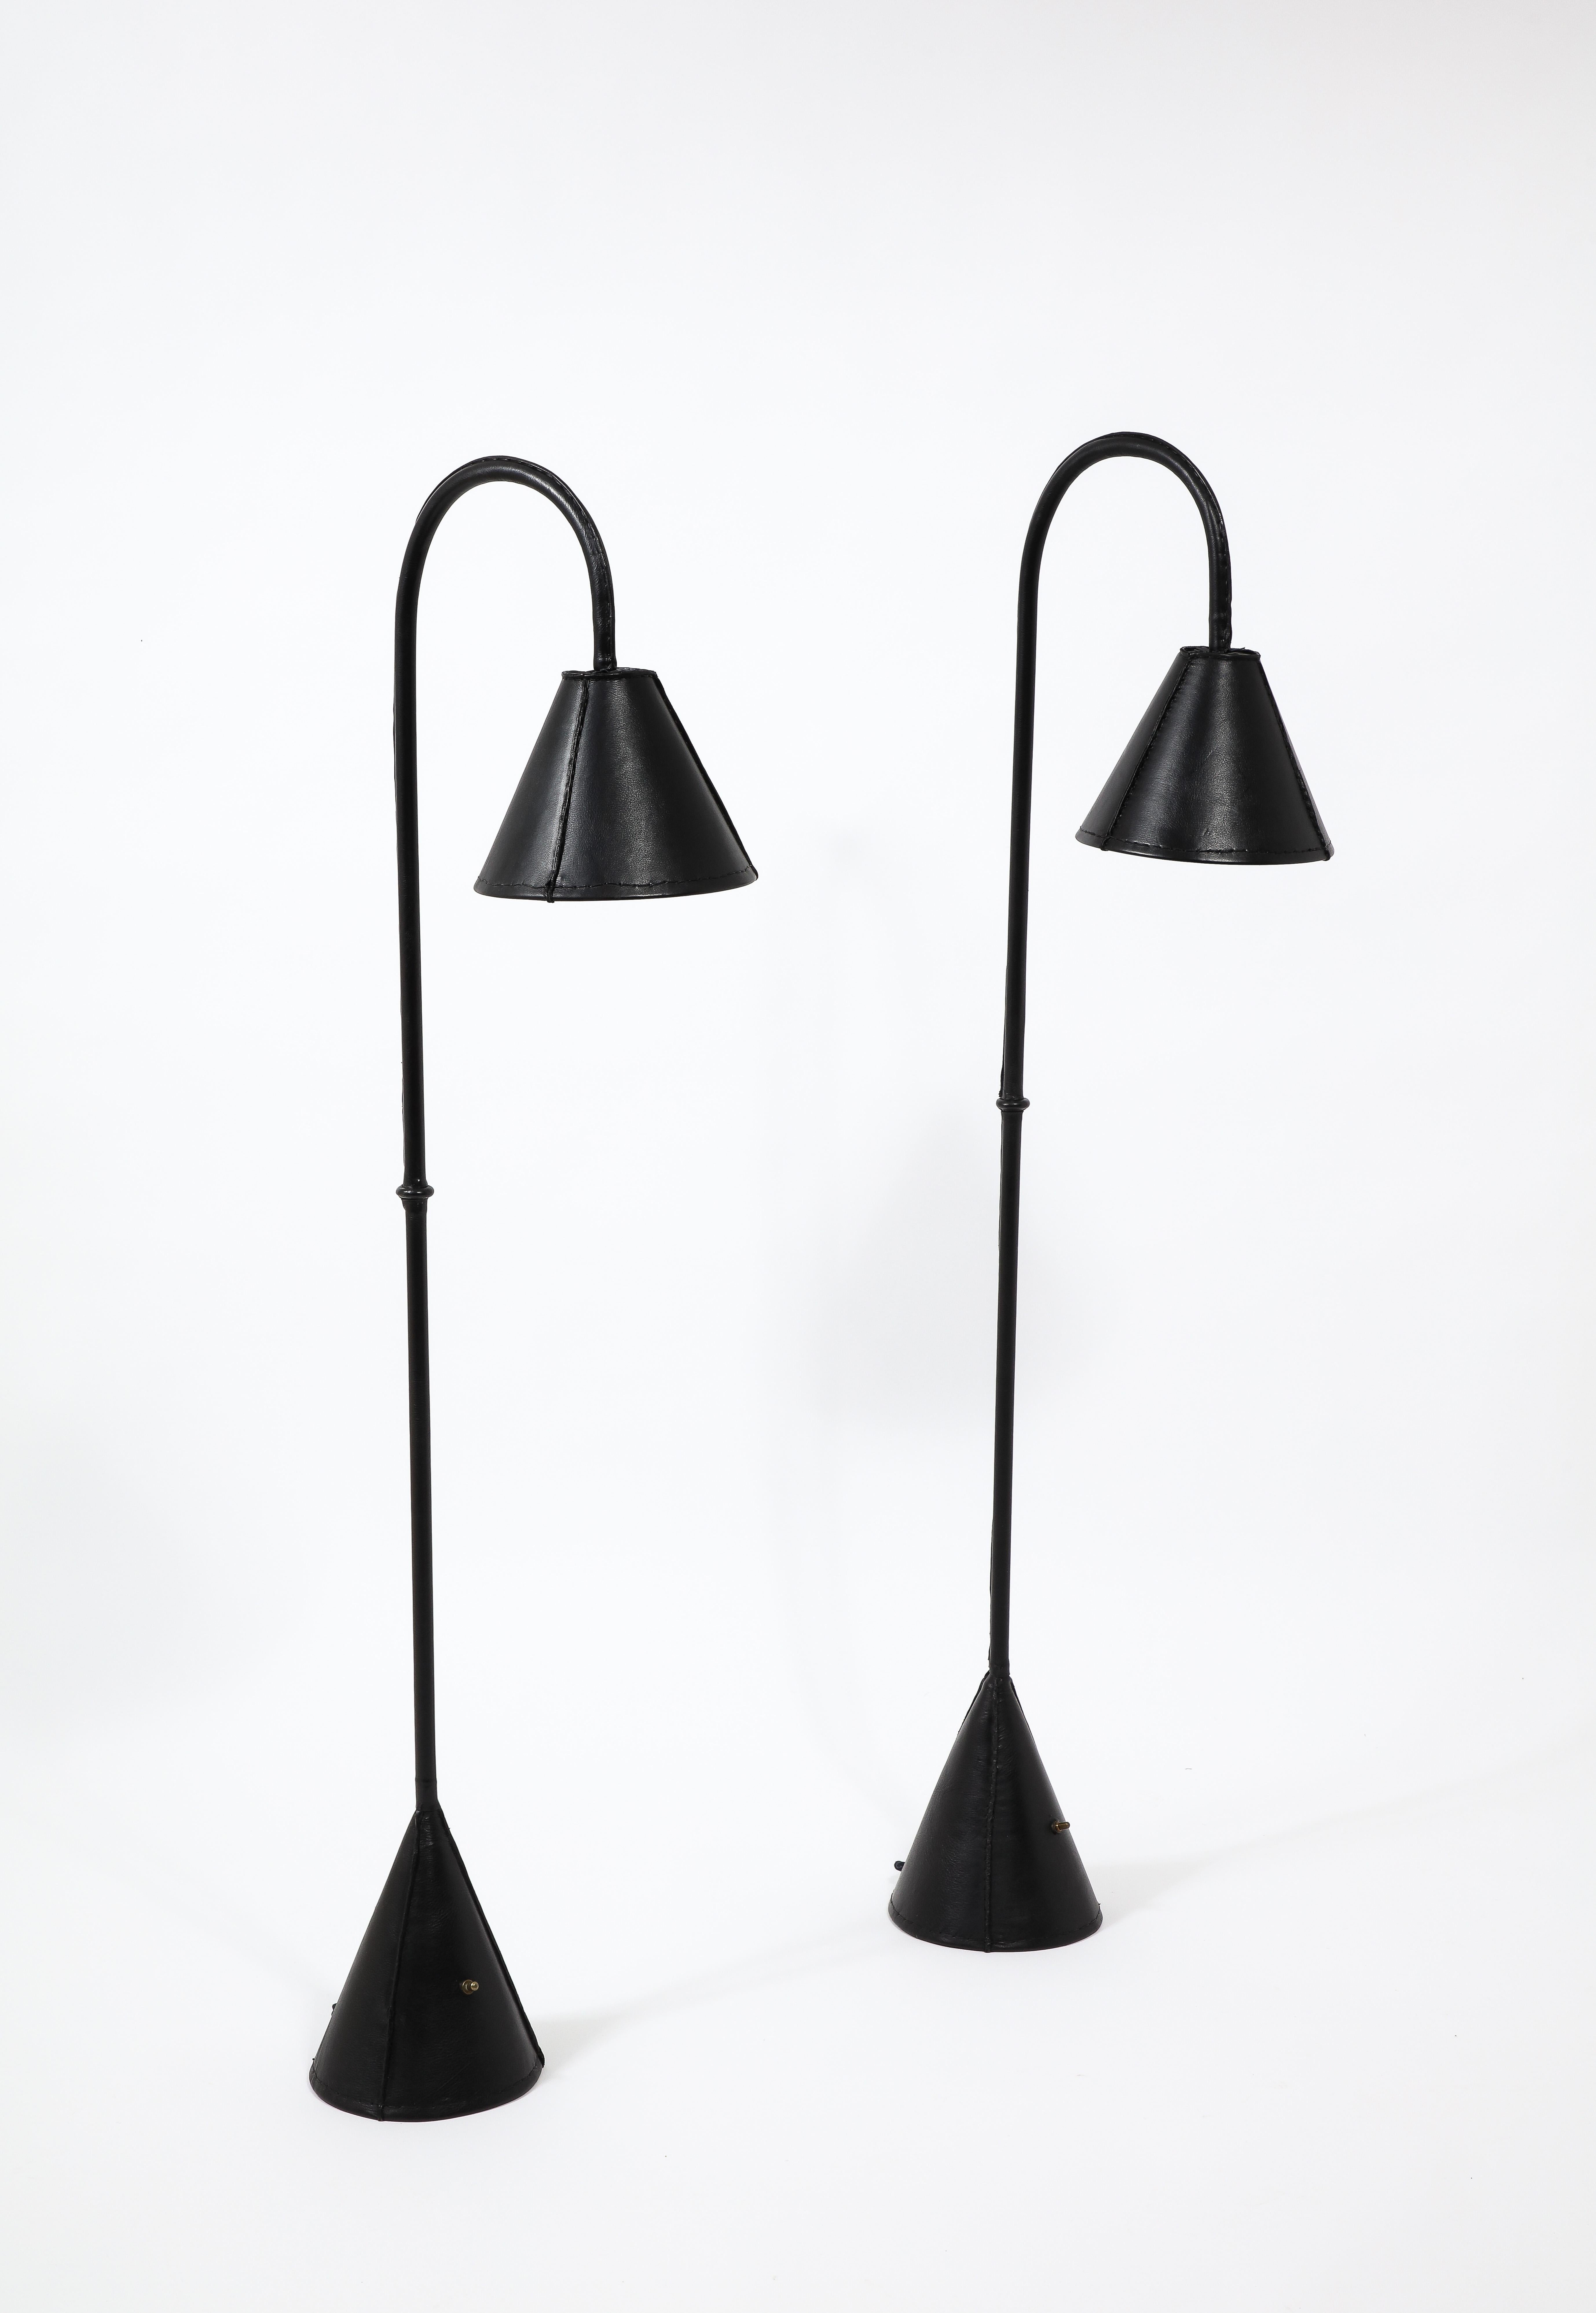 Valenti Reading Lamps in Stitched Leather, France 1960's For Sale 1